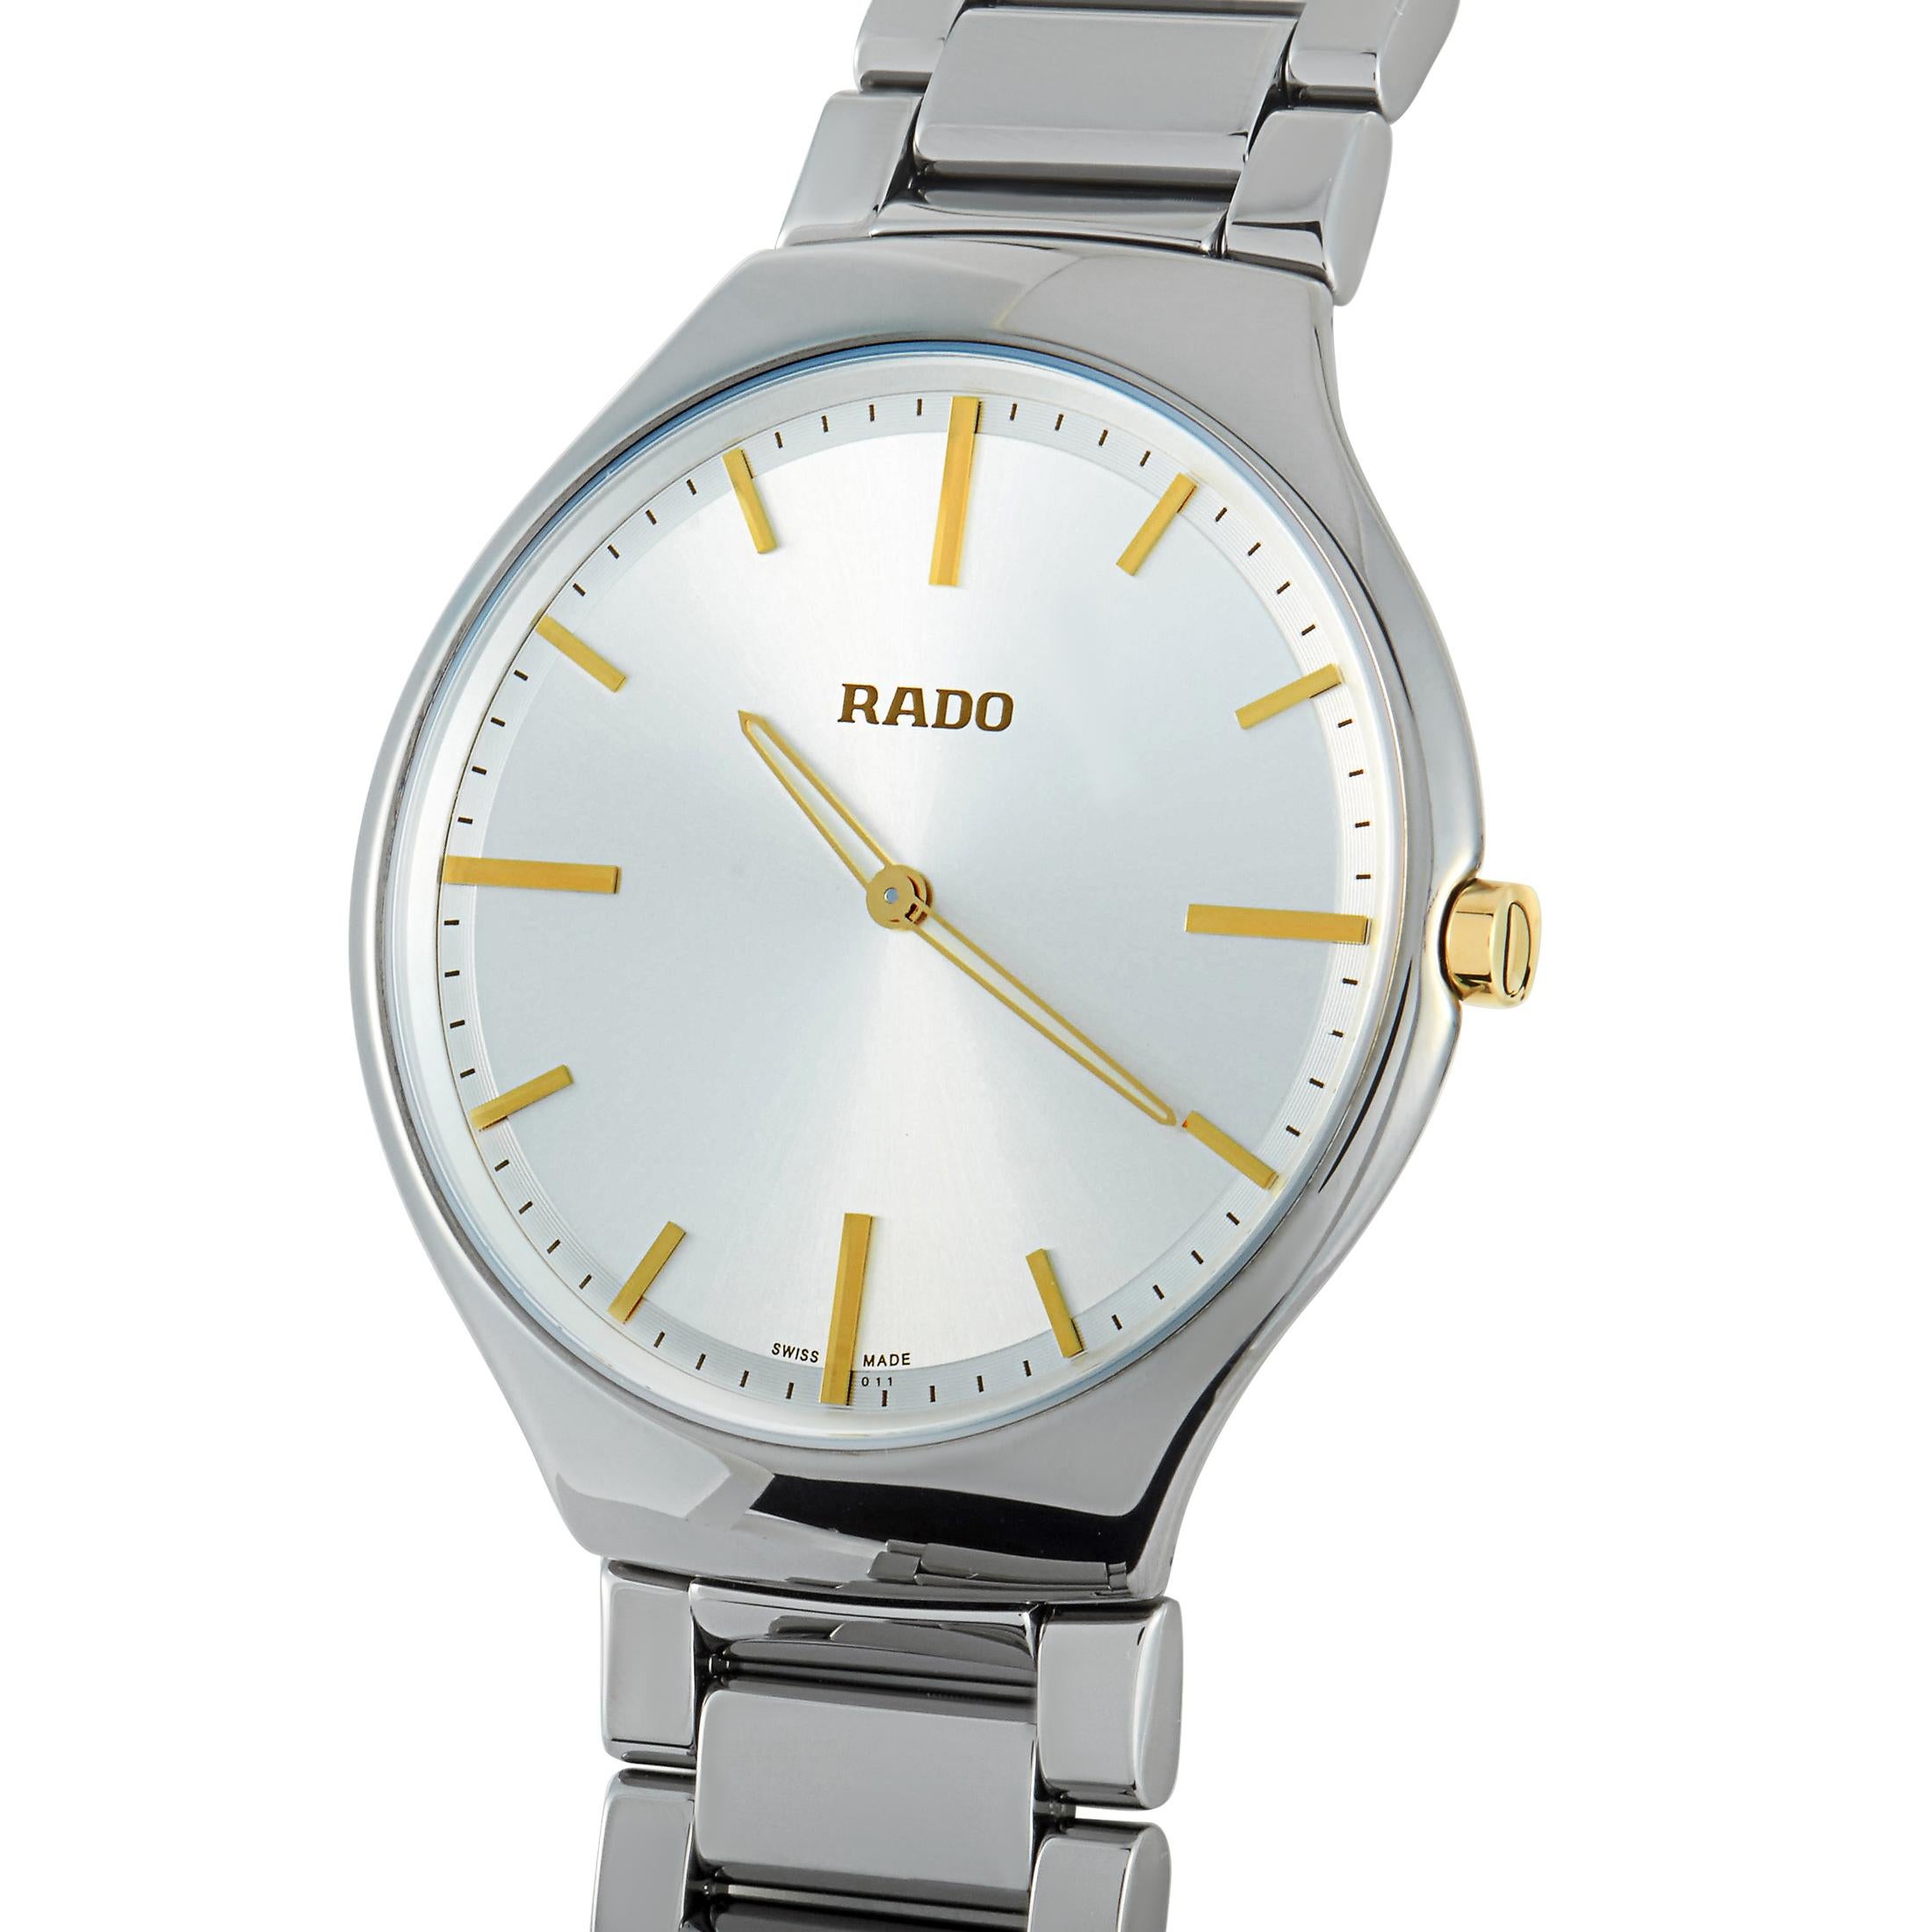 The Rado Montres True Thinline, reference number R27955112/01.140.0955.3.011, boasts a 39 mm ceramic case presented on a matching ceramic bracelet that is fitted with a deployment clasp. This model is powered by the Rado 140 quartz movement and